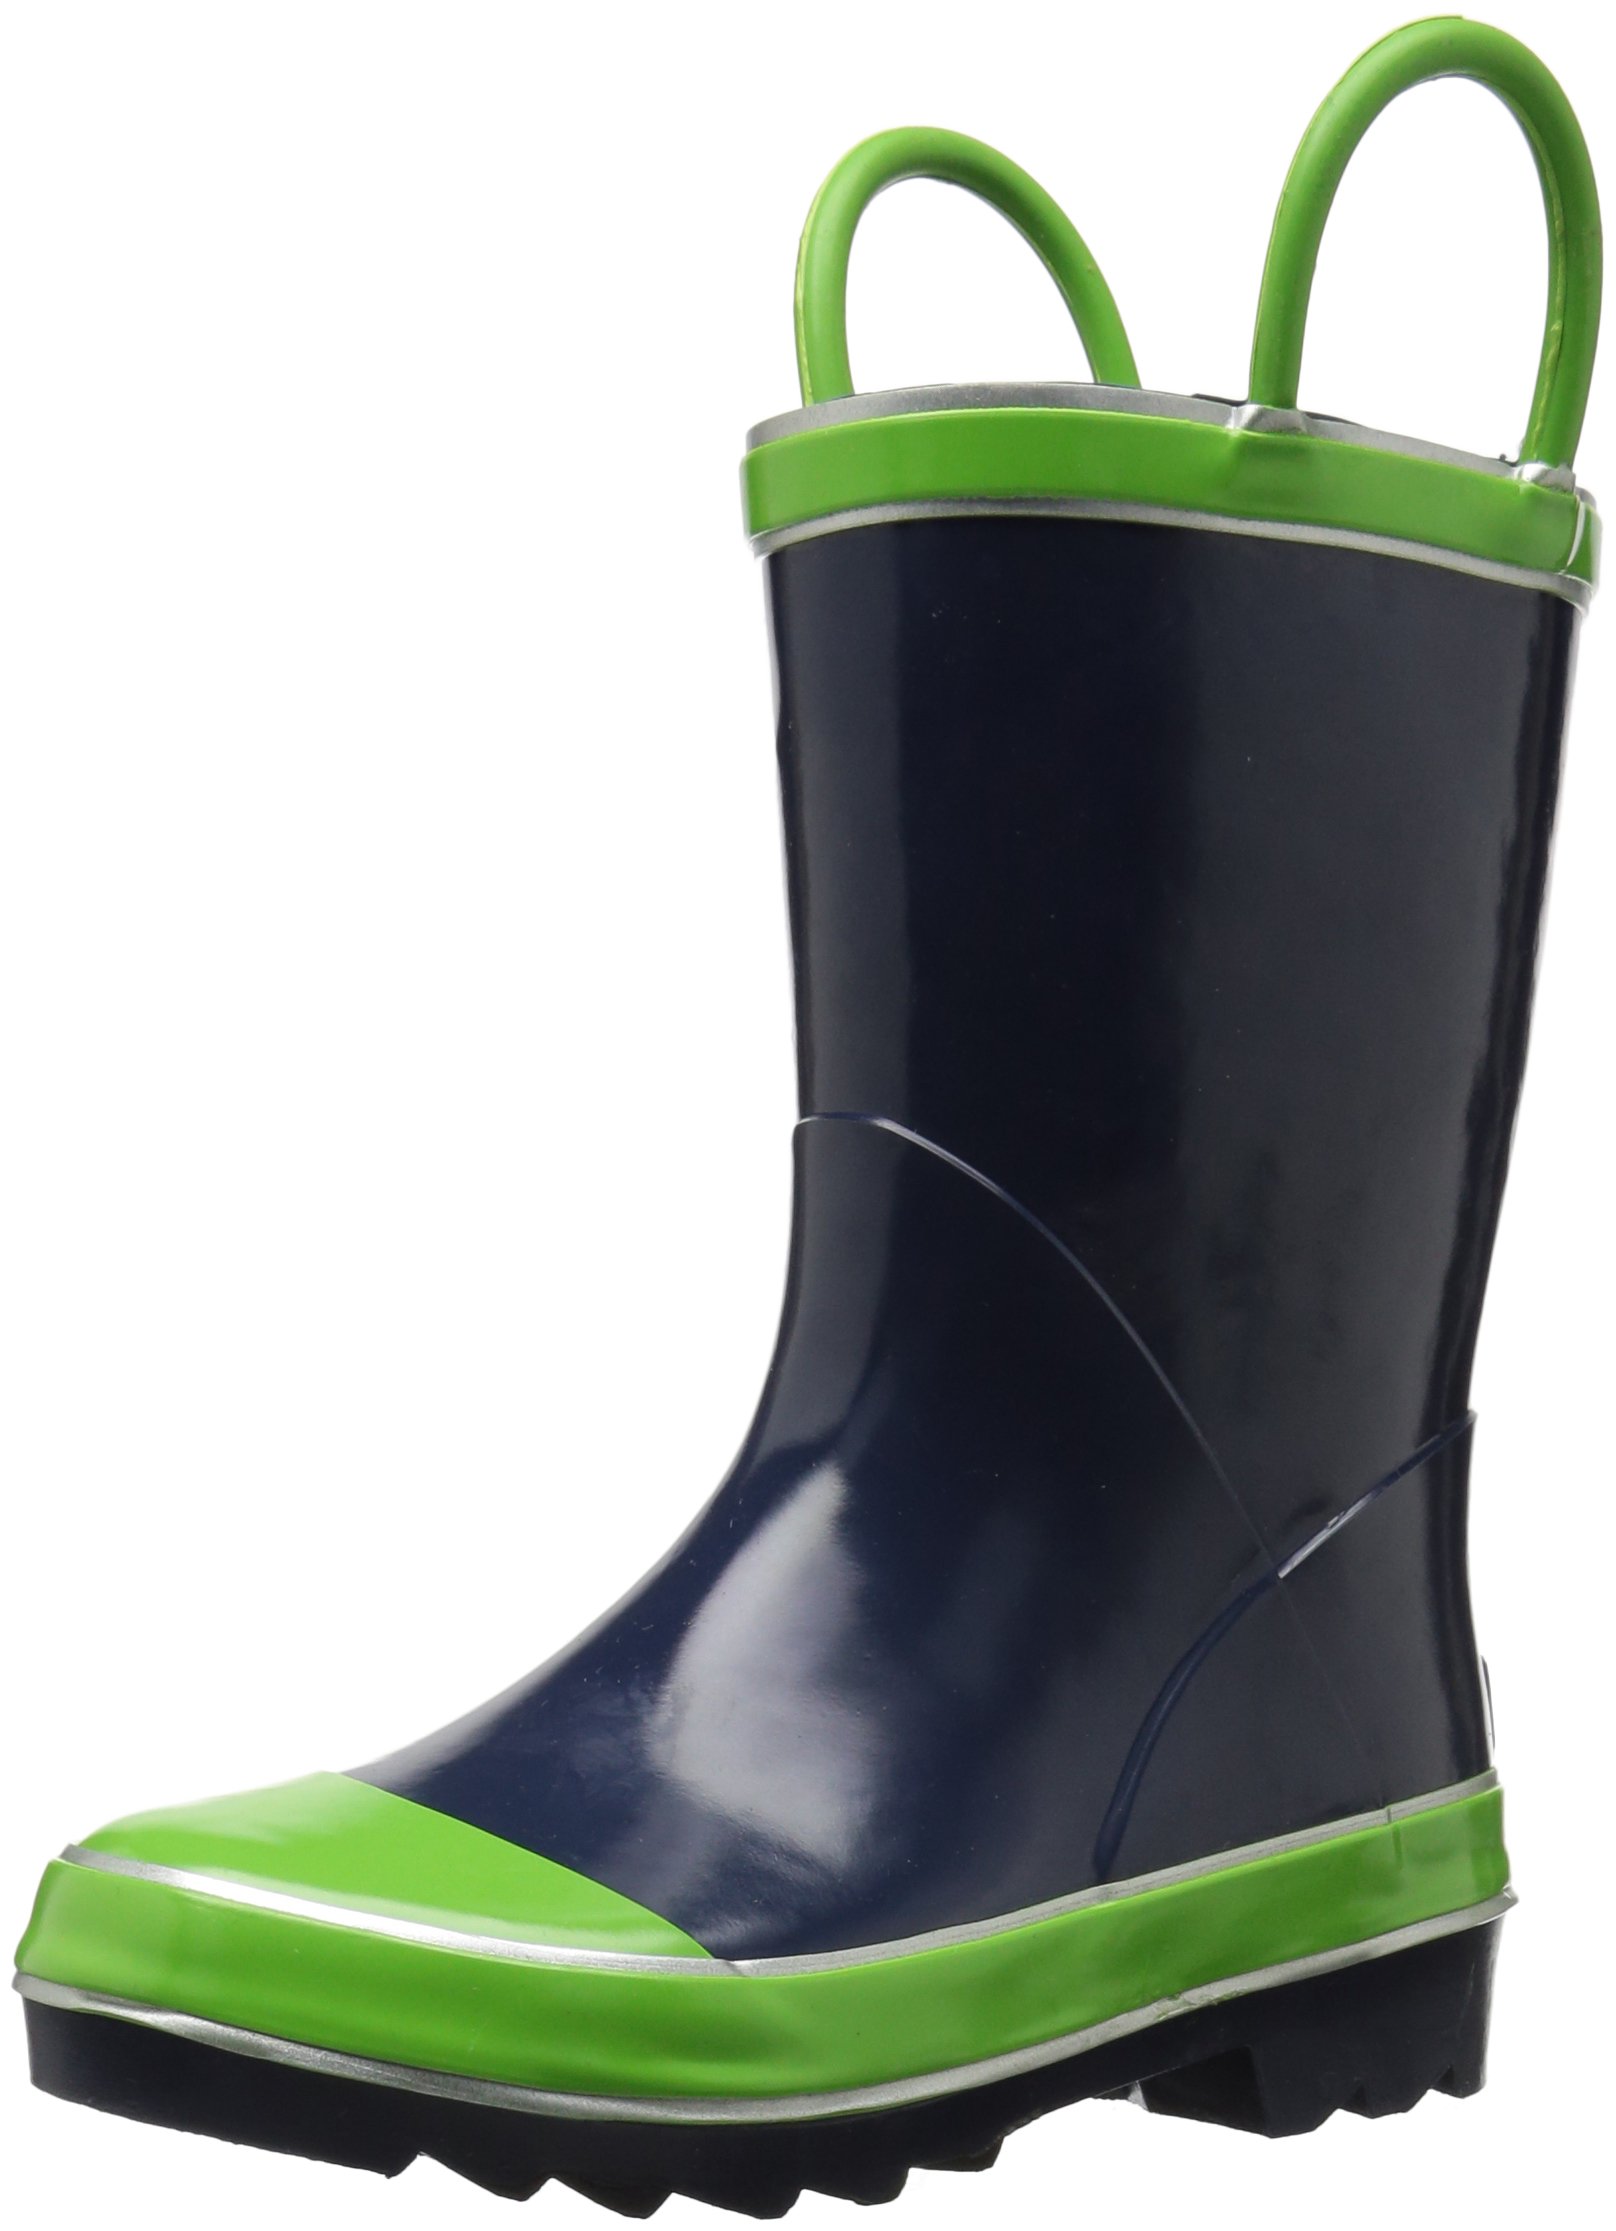 Northside Baby Classic Rain Boot, Navy/Green, 10 M US Toddler